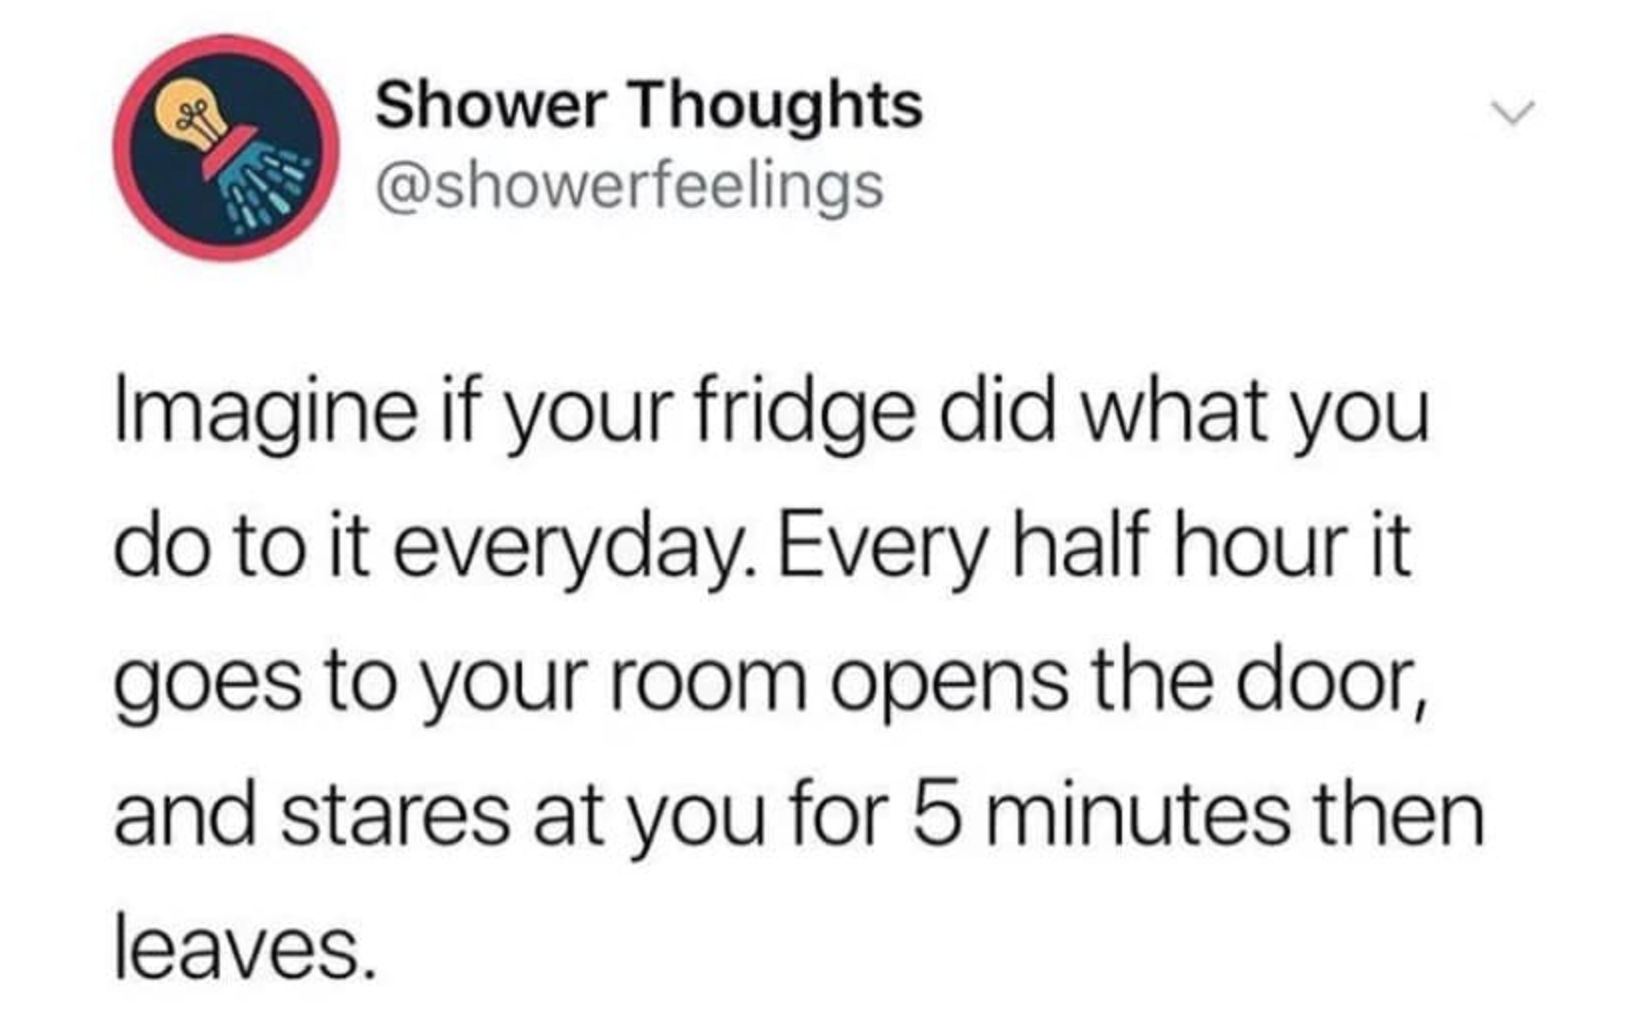 student athlete memes - > Shower Thoughts Imagine if your fridge did what you do to it everyday. Every half hour it goes to your room opens the door, and stares at you for 5 minutes then leaves.